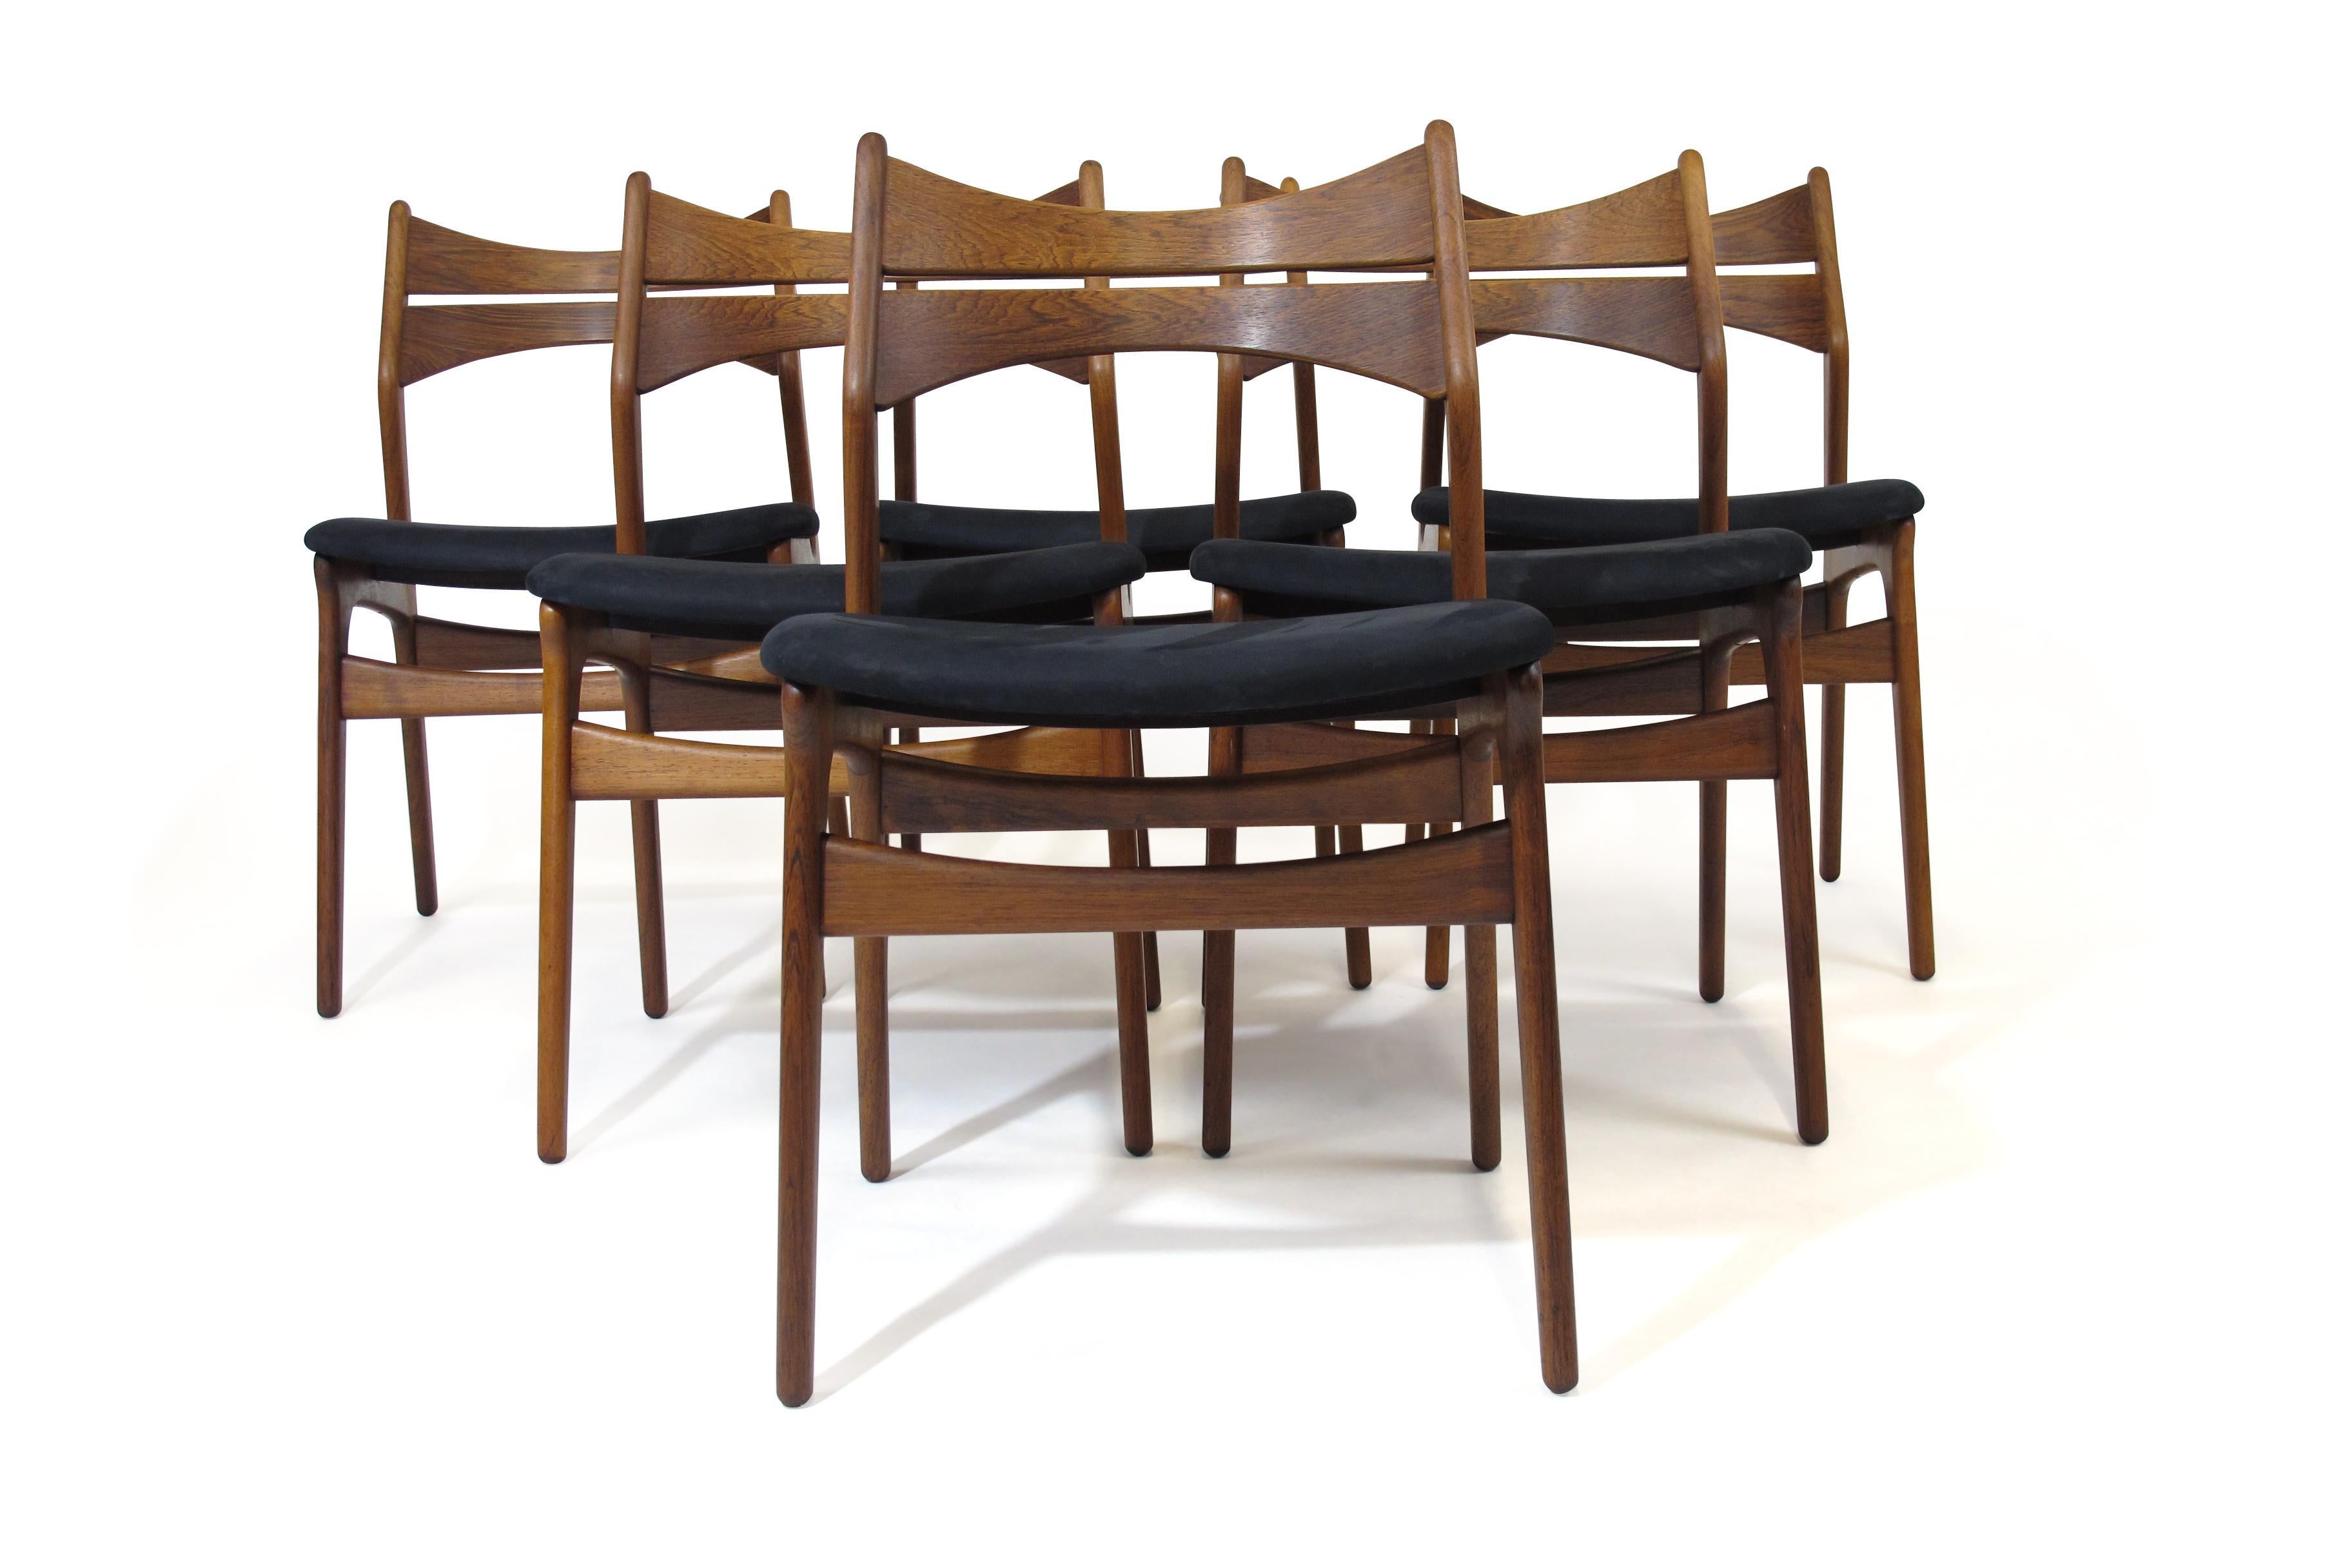 Six Brazilian Rosewood dining chairs designed by Erik Buch for Christensen Denmark, Model 310. Features a solid rosewood frame with comfortable angled back rests. Newly upholstered seats in navy nubuck leather. Chairs are fully restored and in a